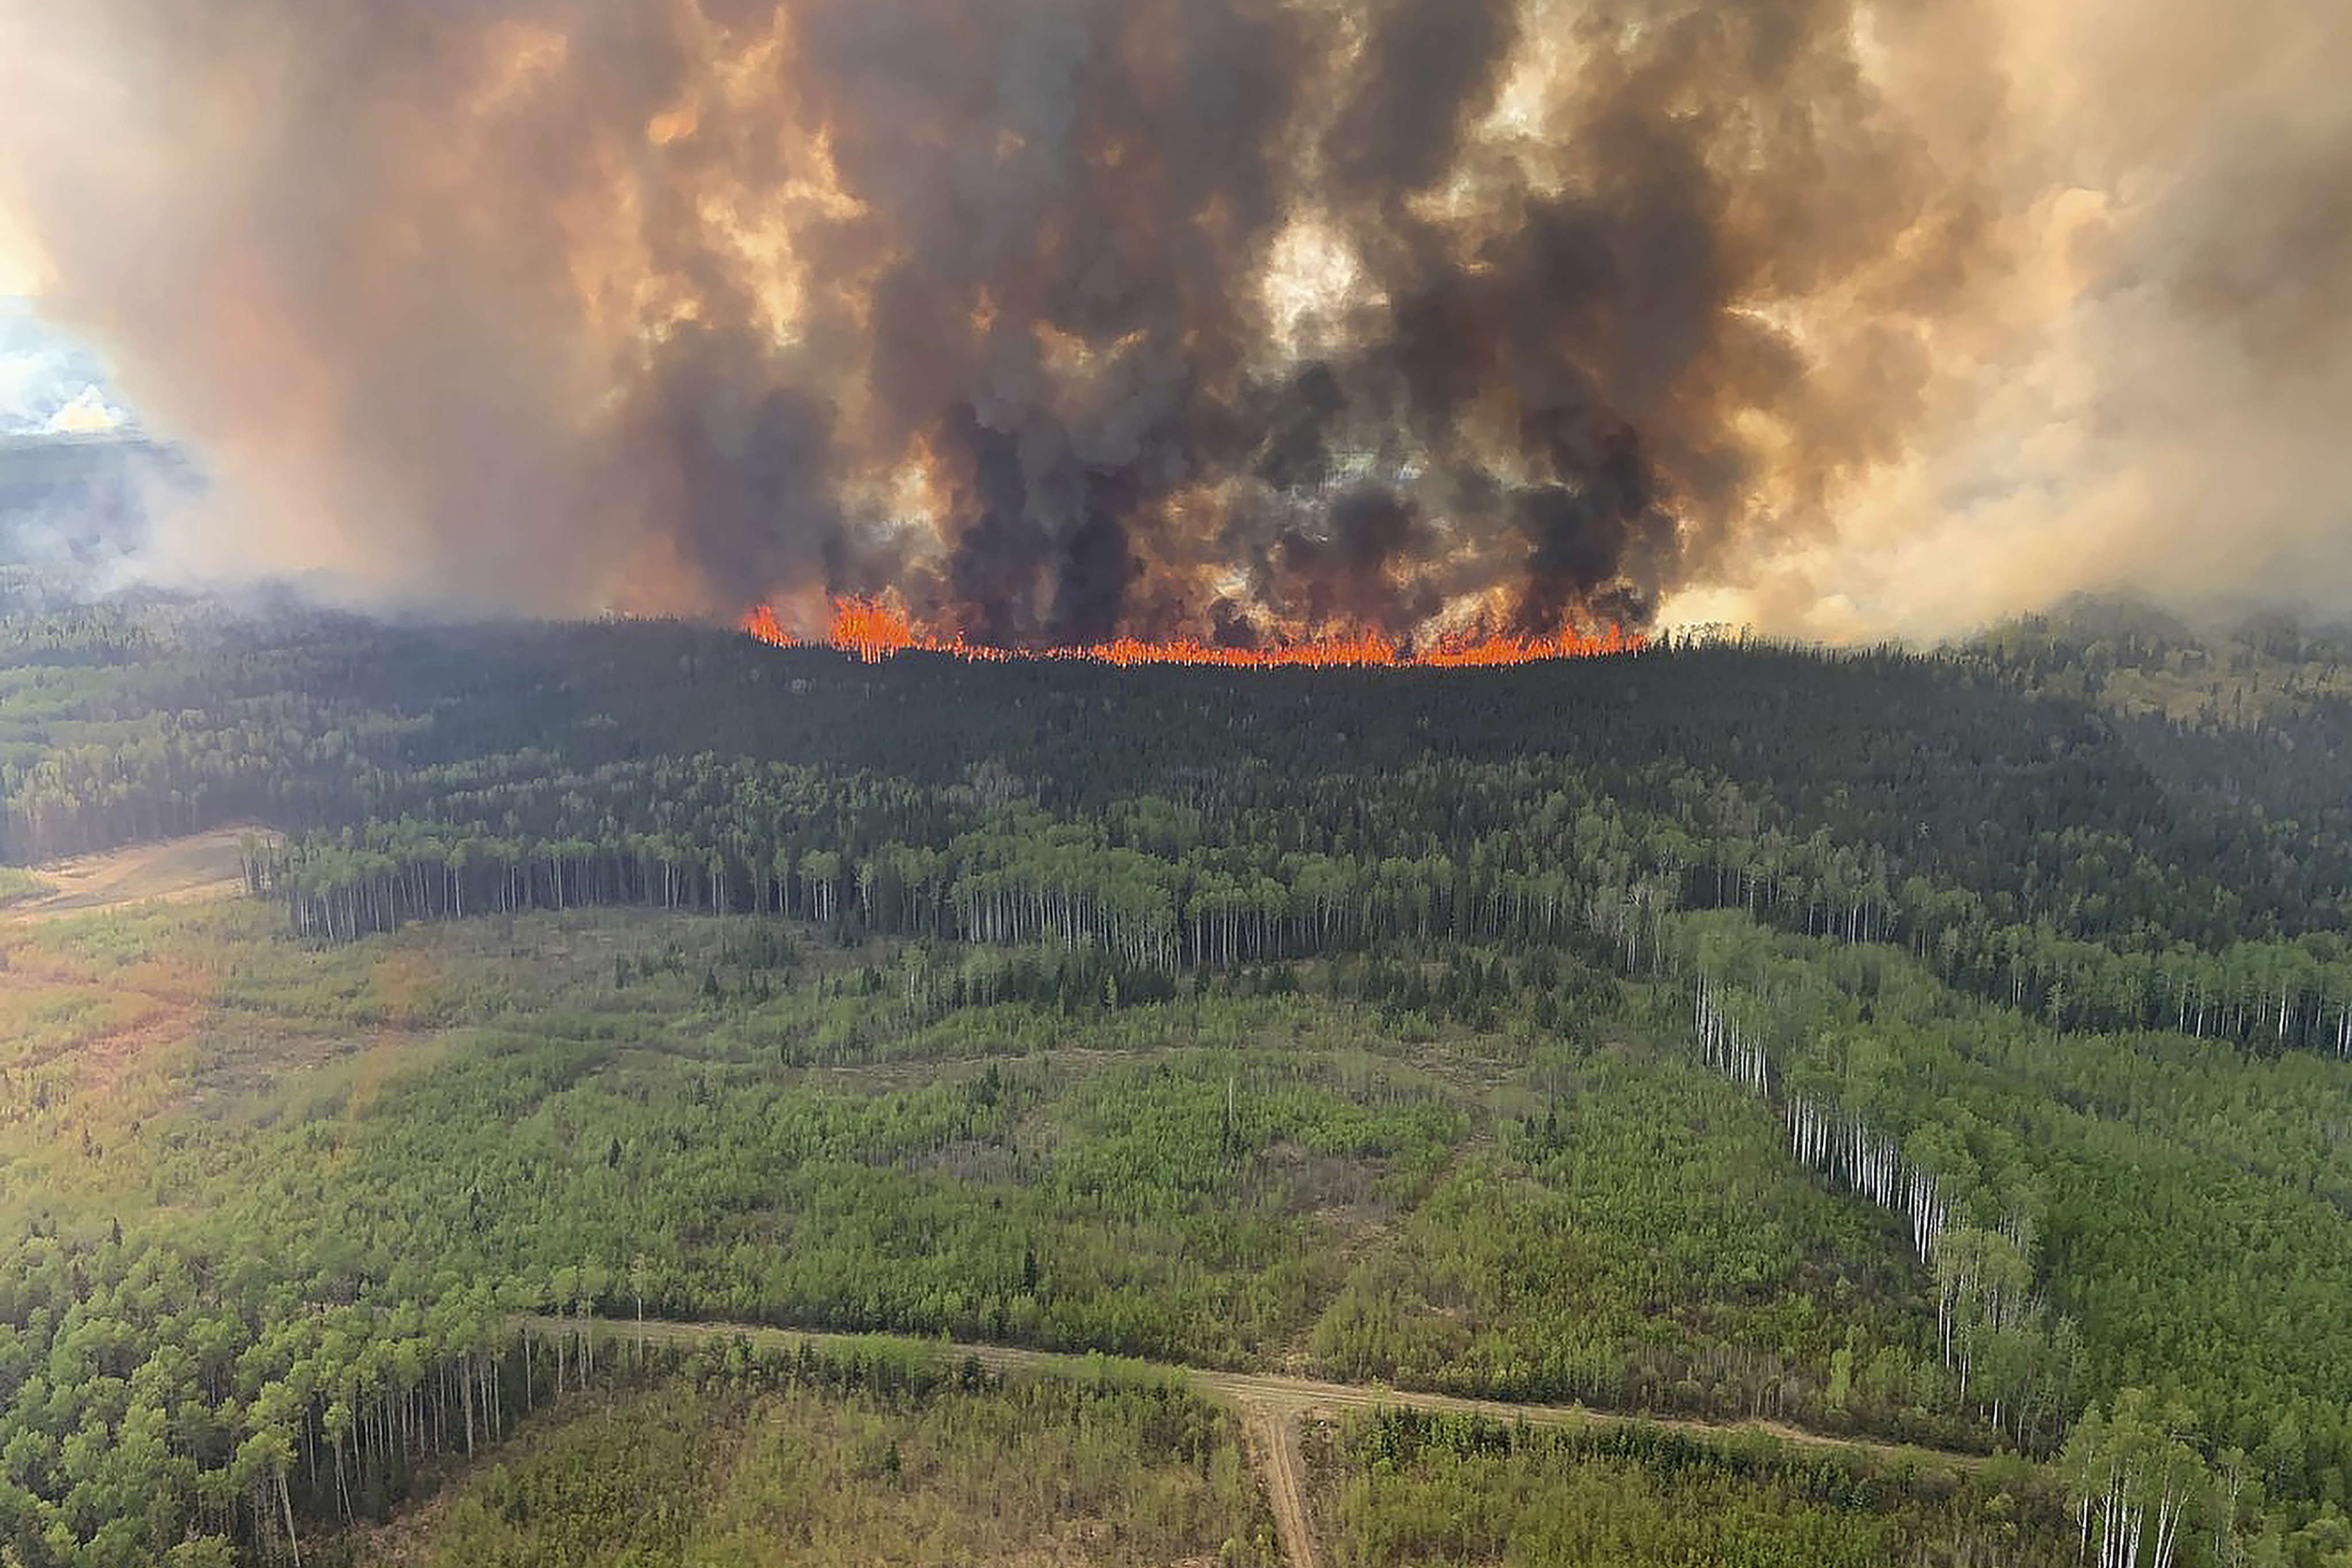 The Bald Mountain Wildfire burns in the Grande Prairie Forest Area in Alberta, Canada on Friday,. Photo: Government of Alberta Fire Service / Canadian Press via AP